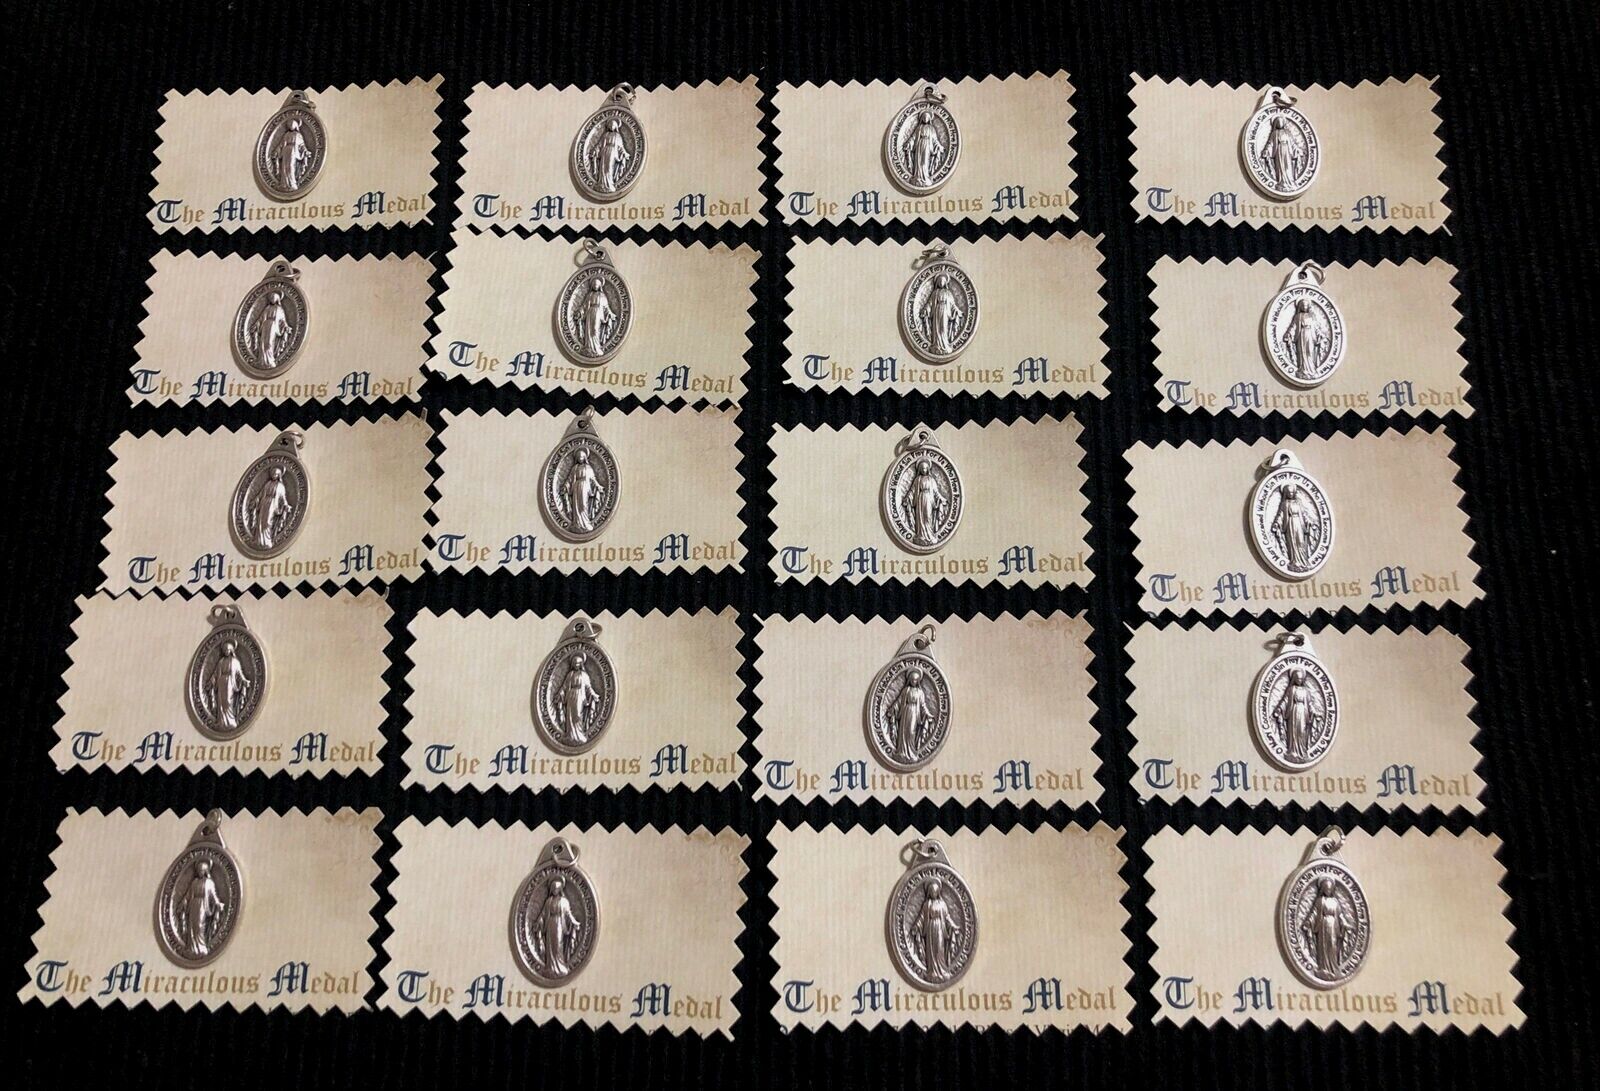 ⭐️LOT OF 20 BLESSED VIRGIN MARY OUR LADY OF THE MIRACULOUS MEDAL SIGNED ITALY⭐️